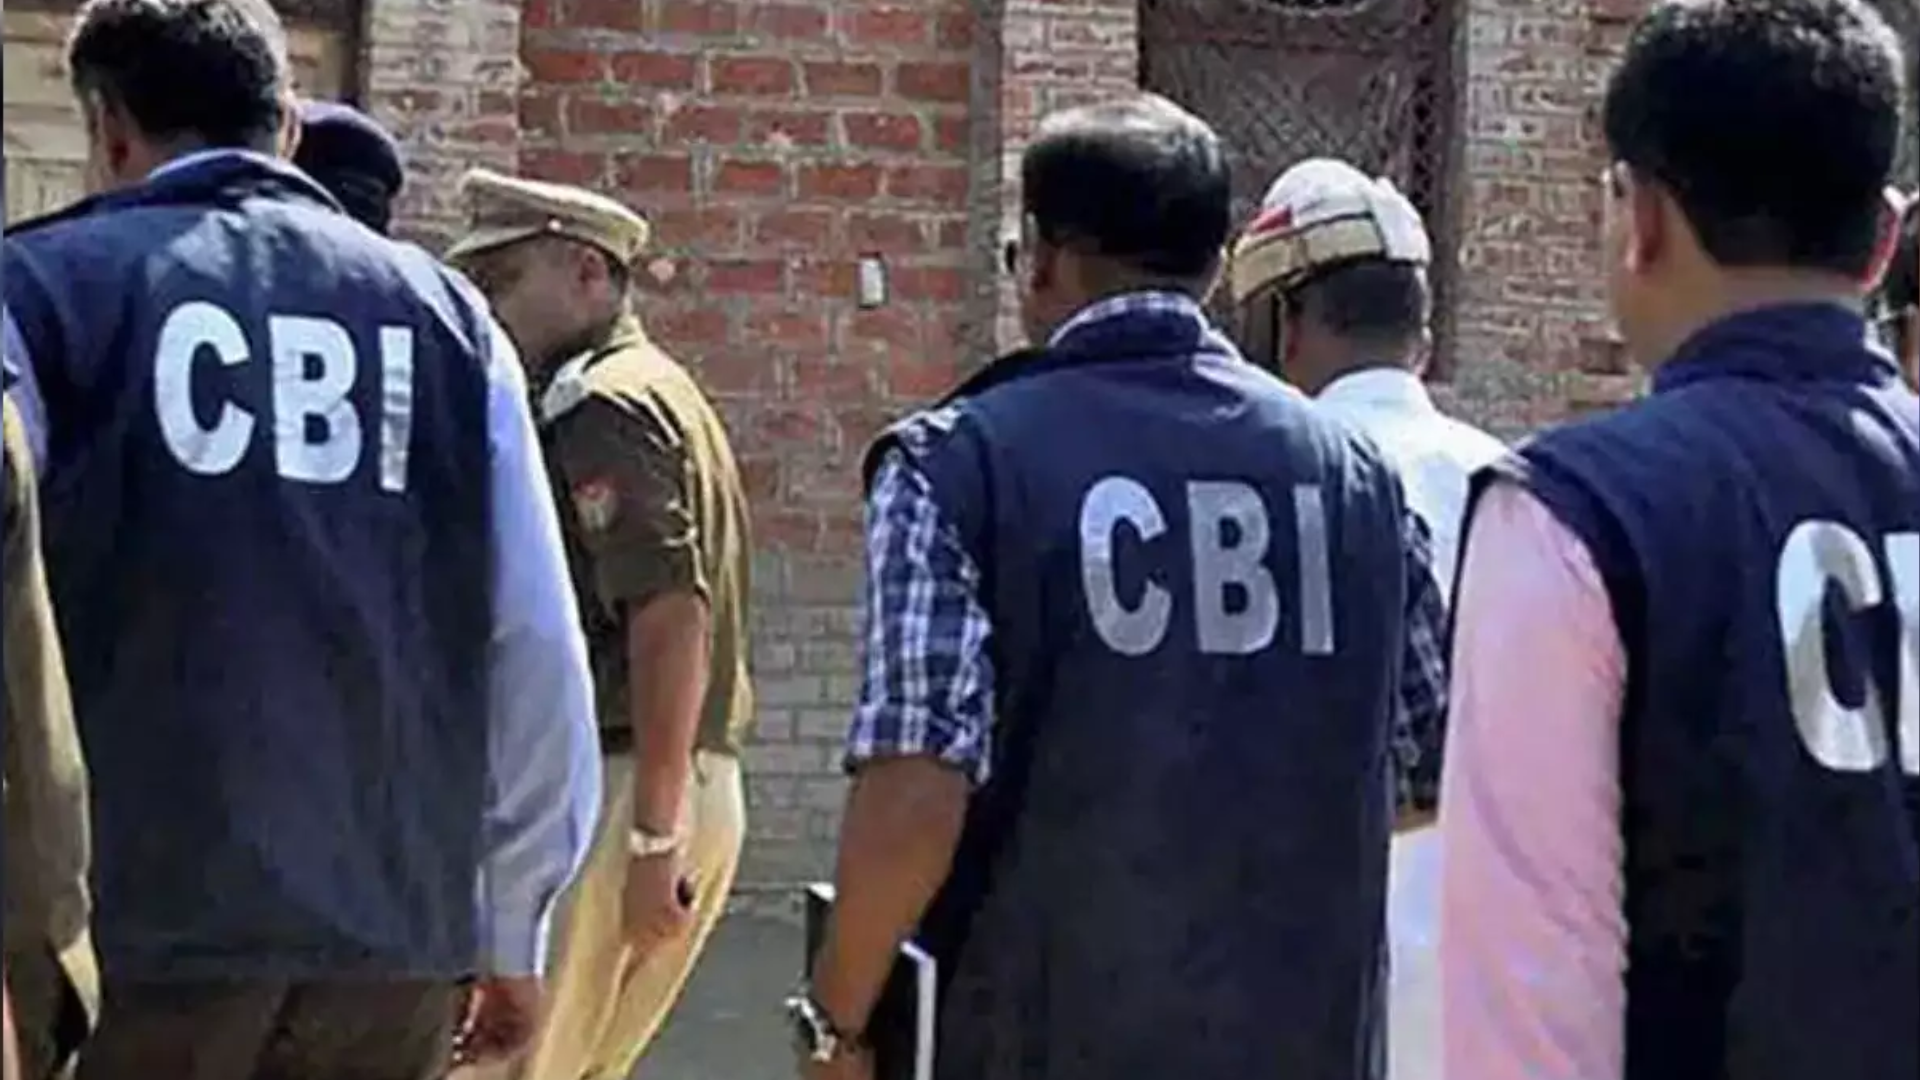 CBI Registers First Case in Sandeshkhali, West Bengal, Amid Land Grab and Assault Allegations